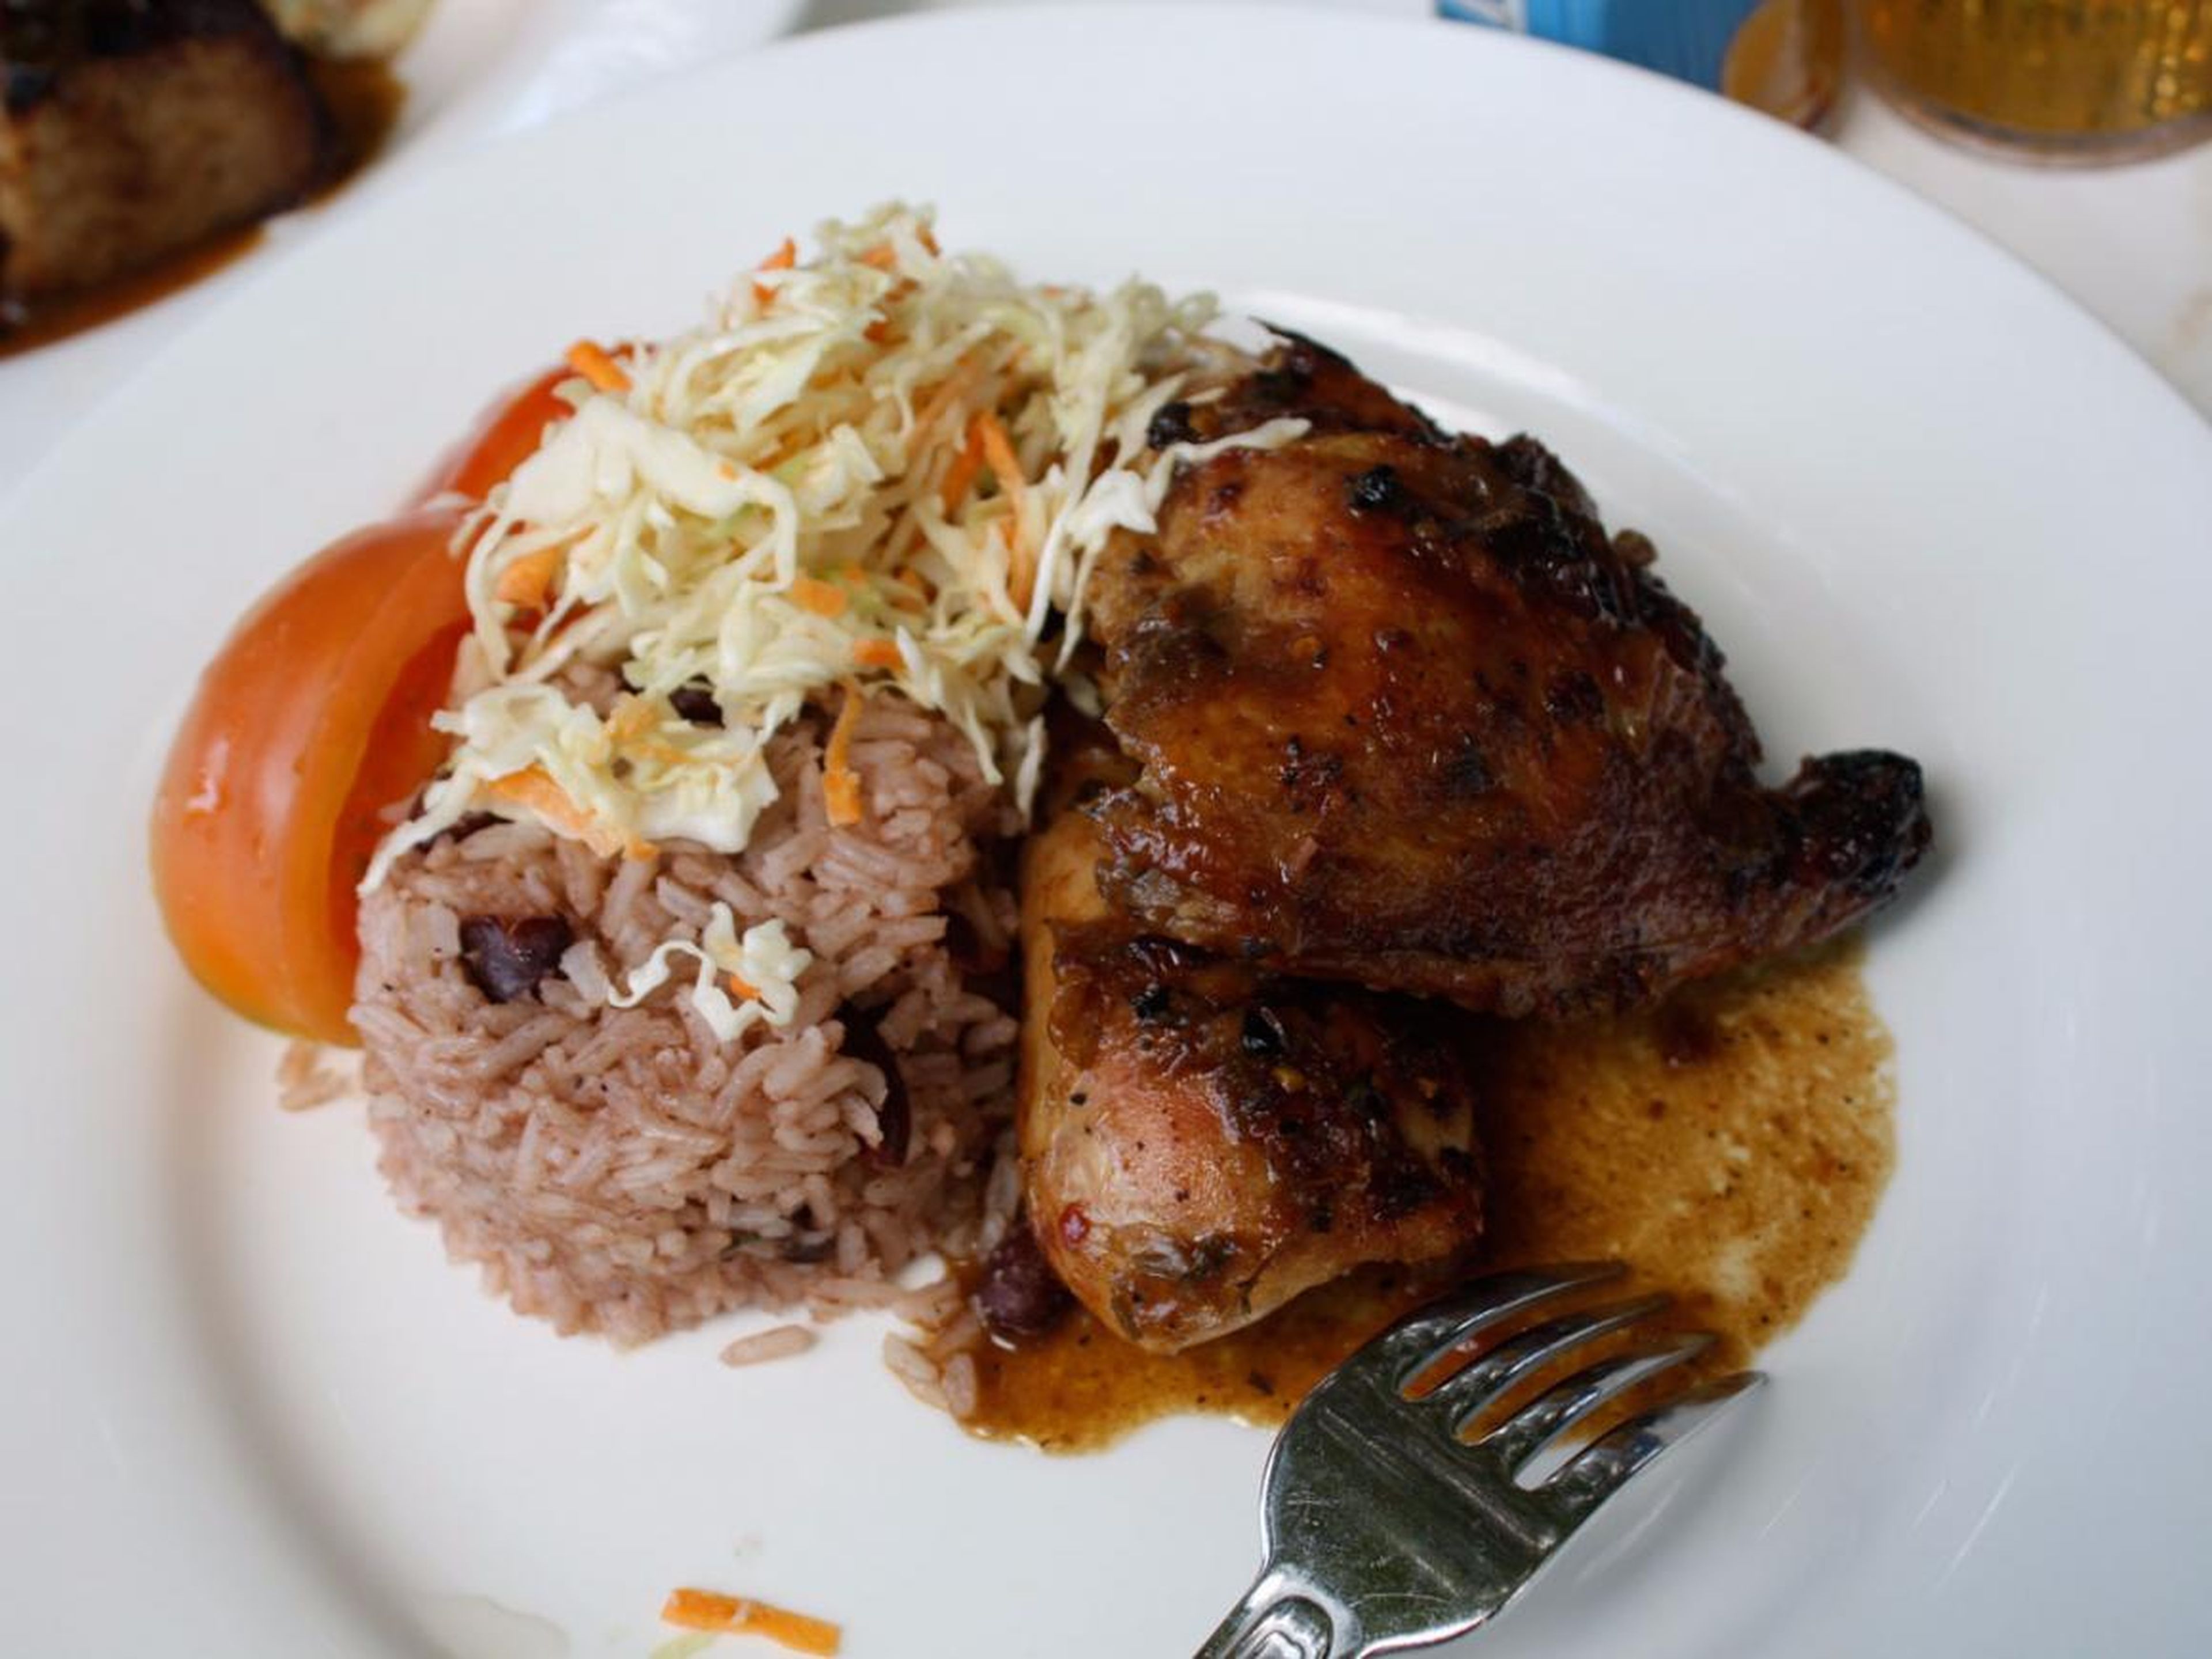 Jamaican jerk chicken with rice and peas.